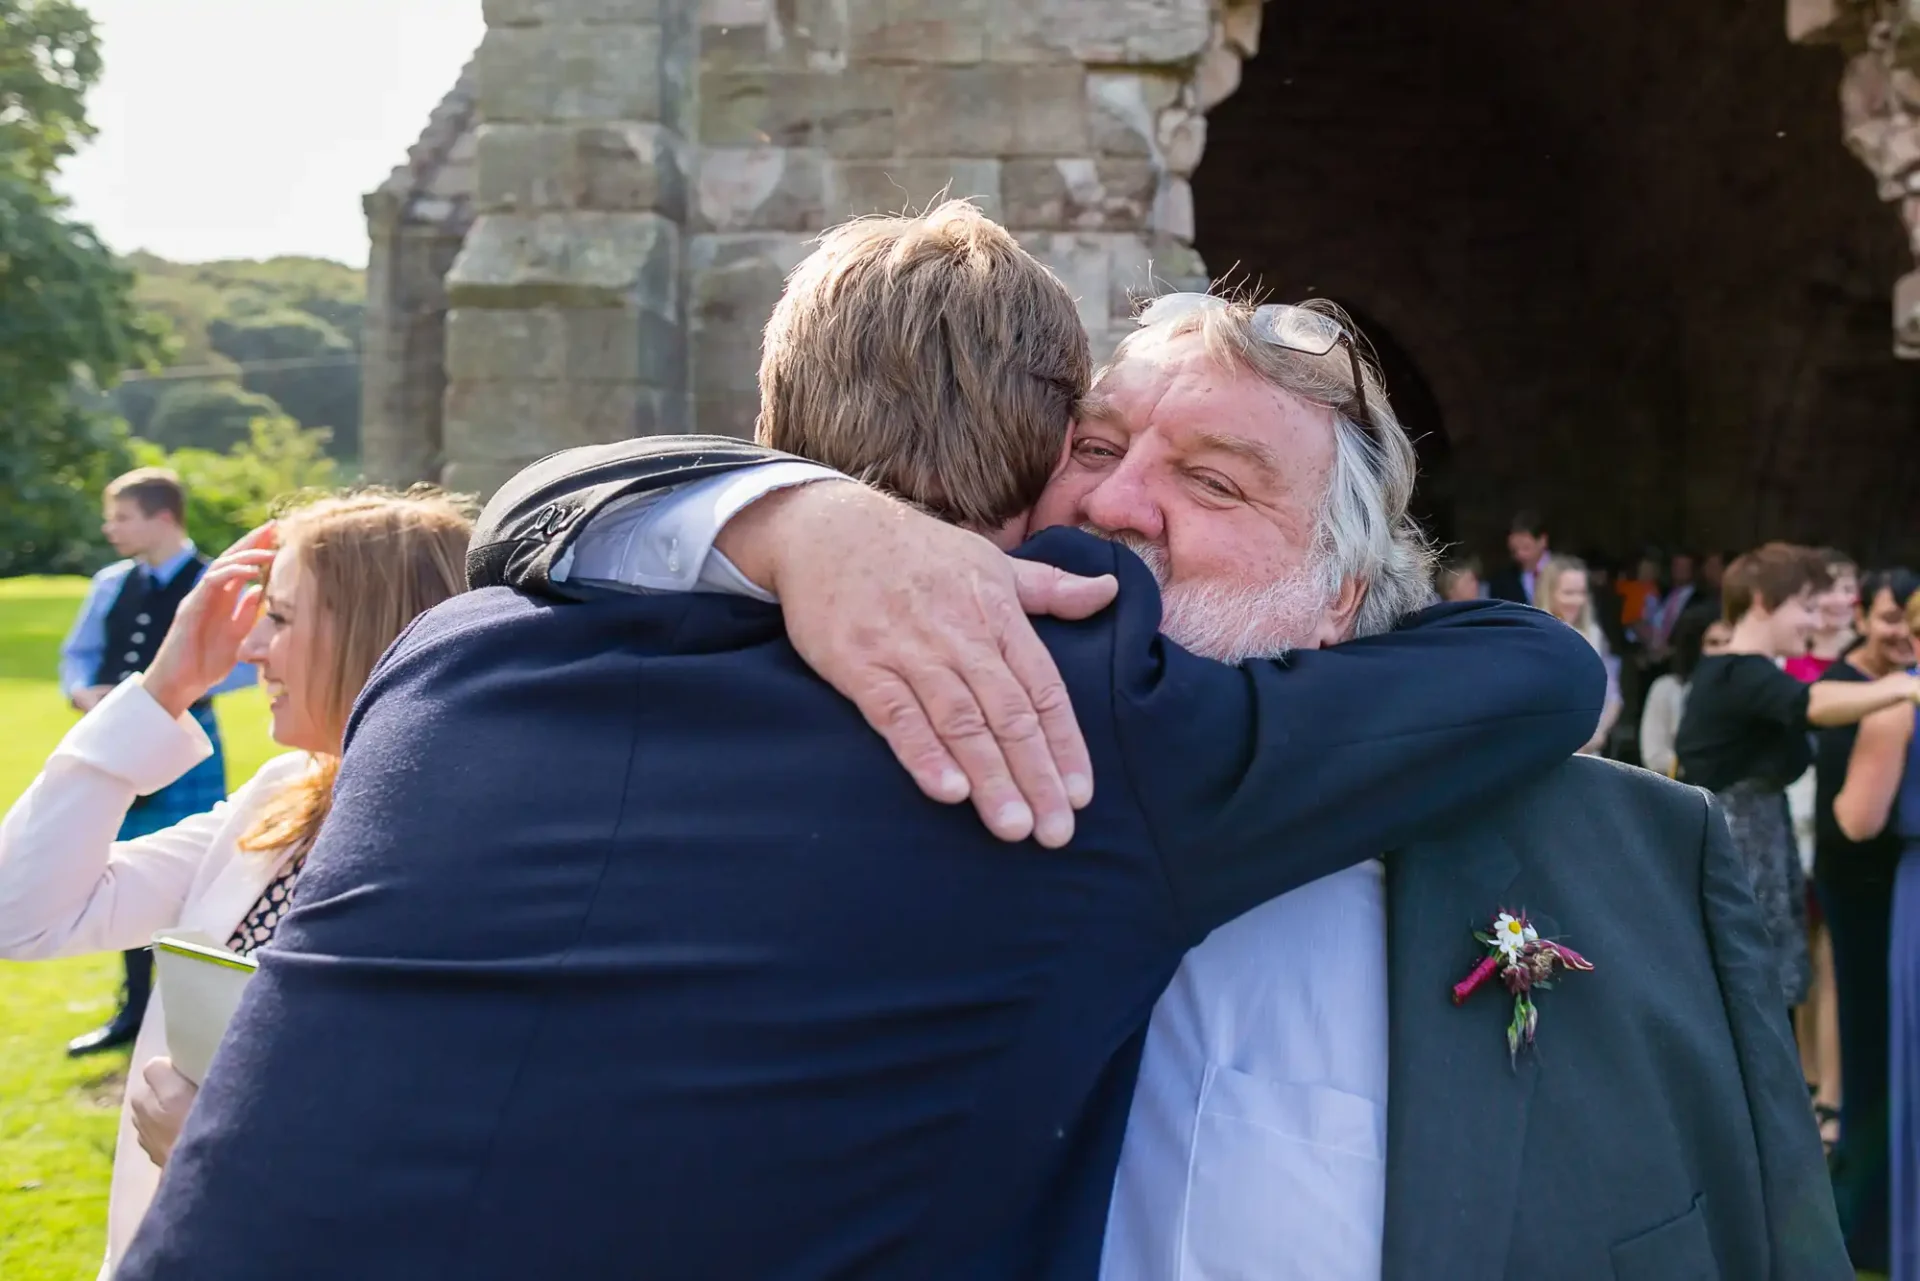 Two men embracing at a sunny outdoor wedding, one with a boutonniere, under an archway with guests in the background.